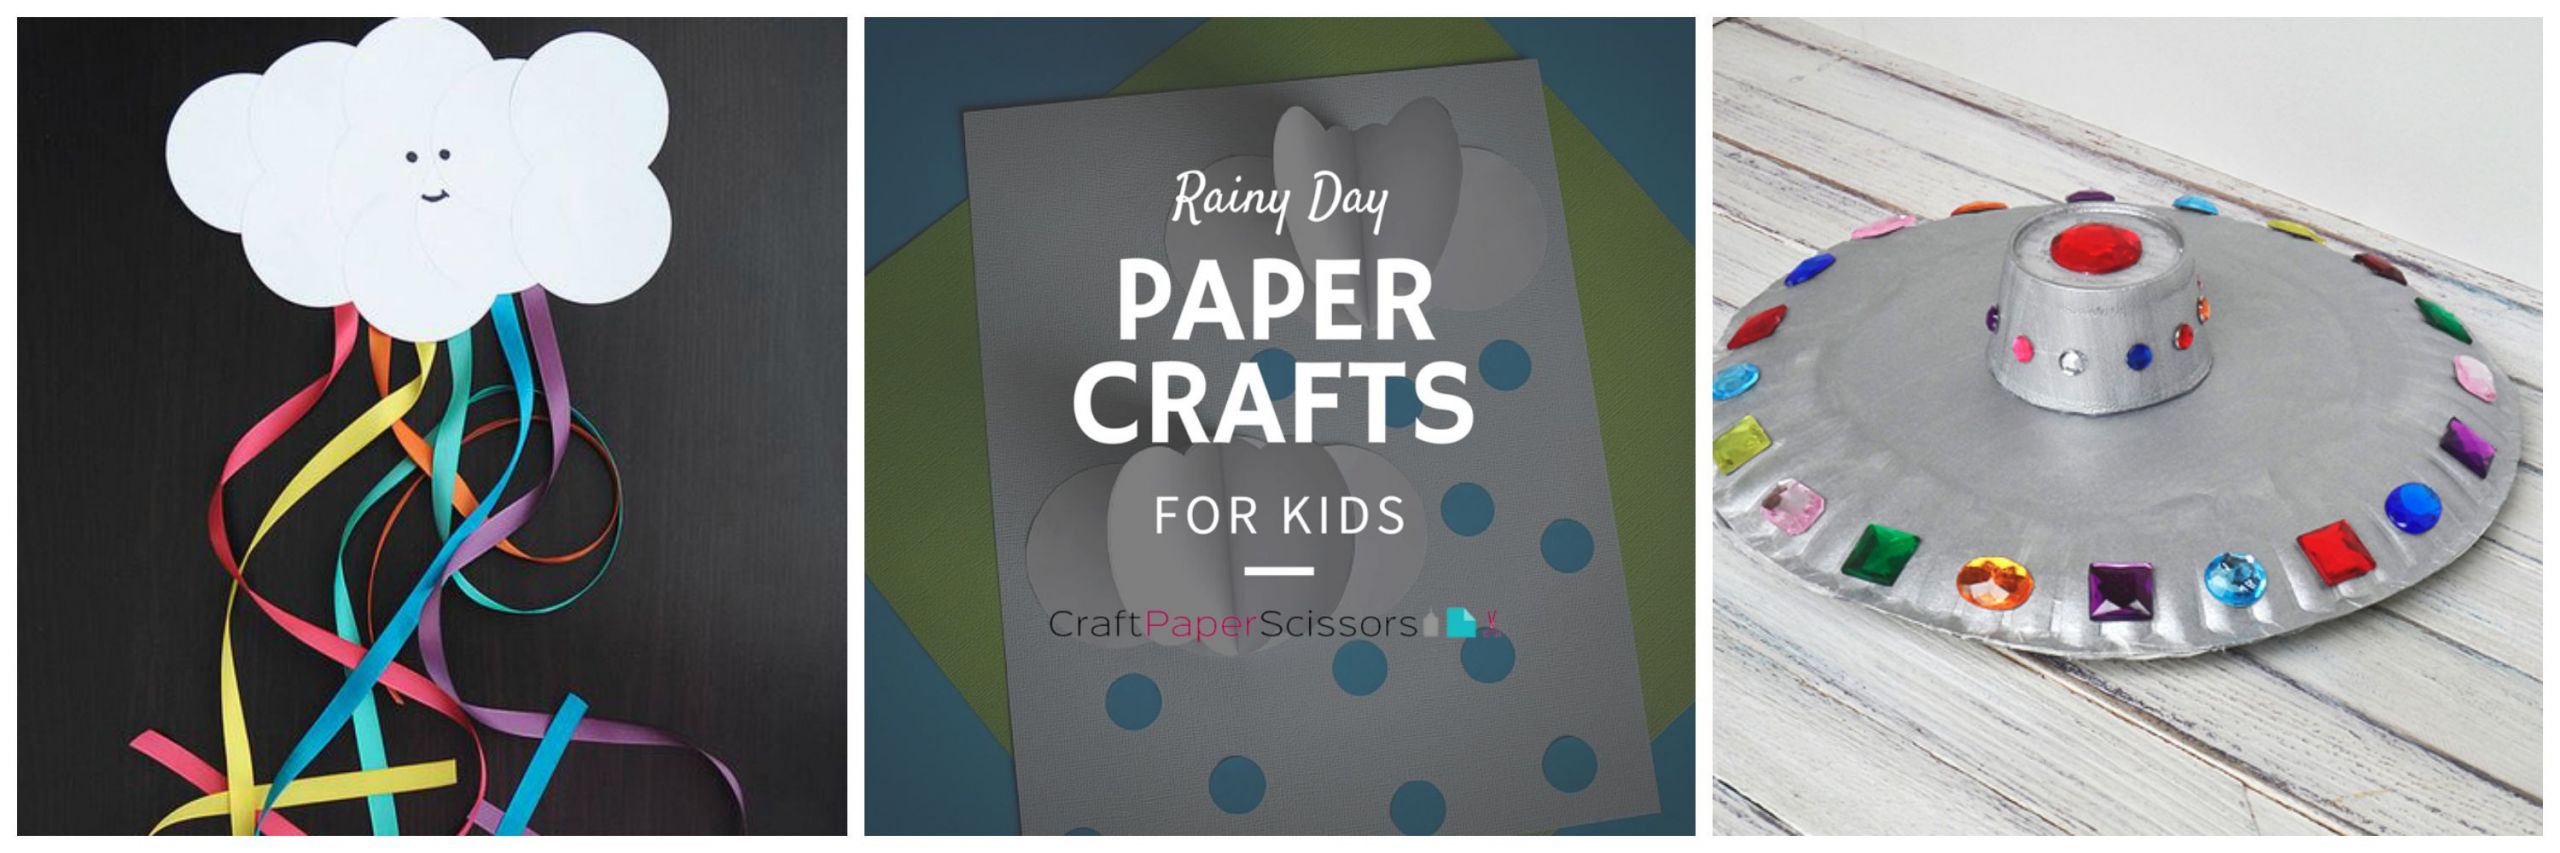 Rainy Day Crafts For Kids
 Rainy Day Paper Crafts for Kids Craft Paper Scissors